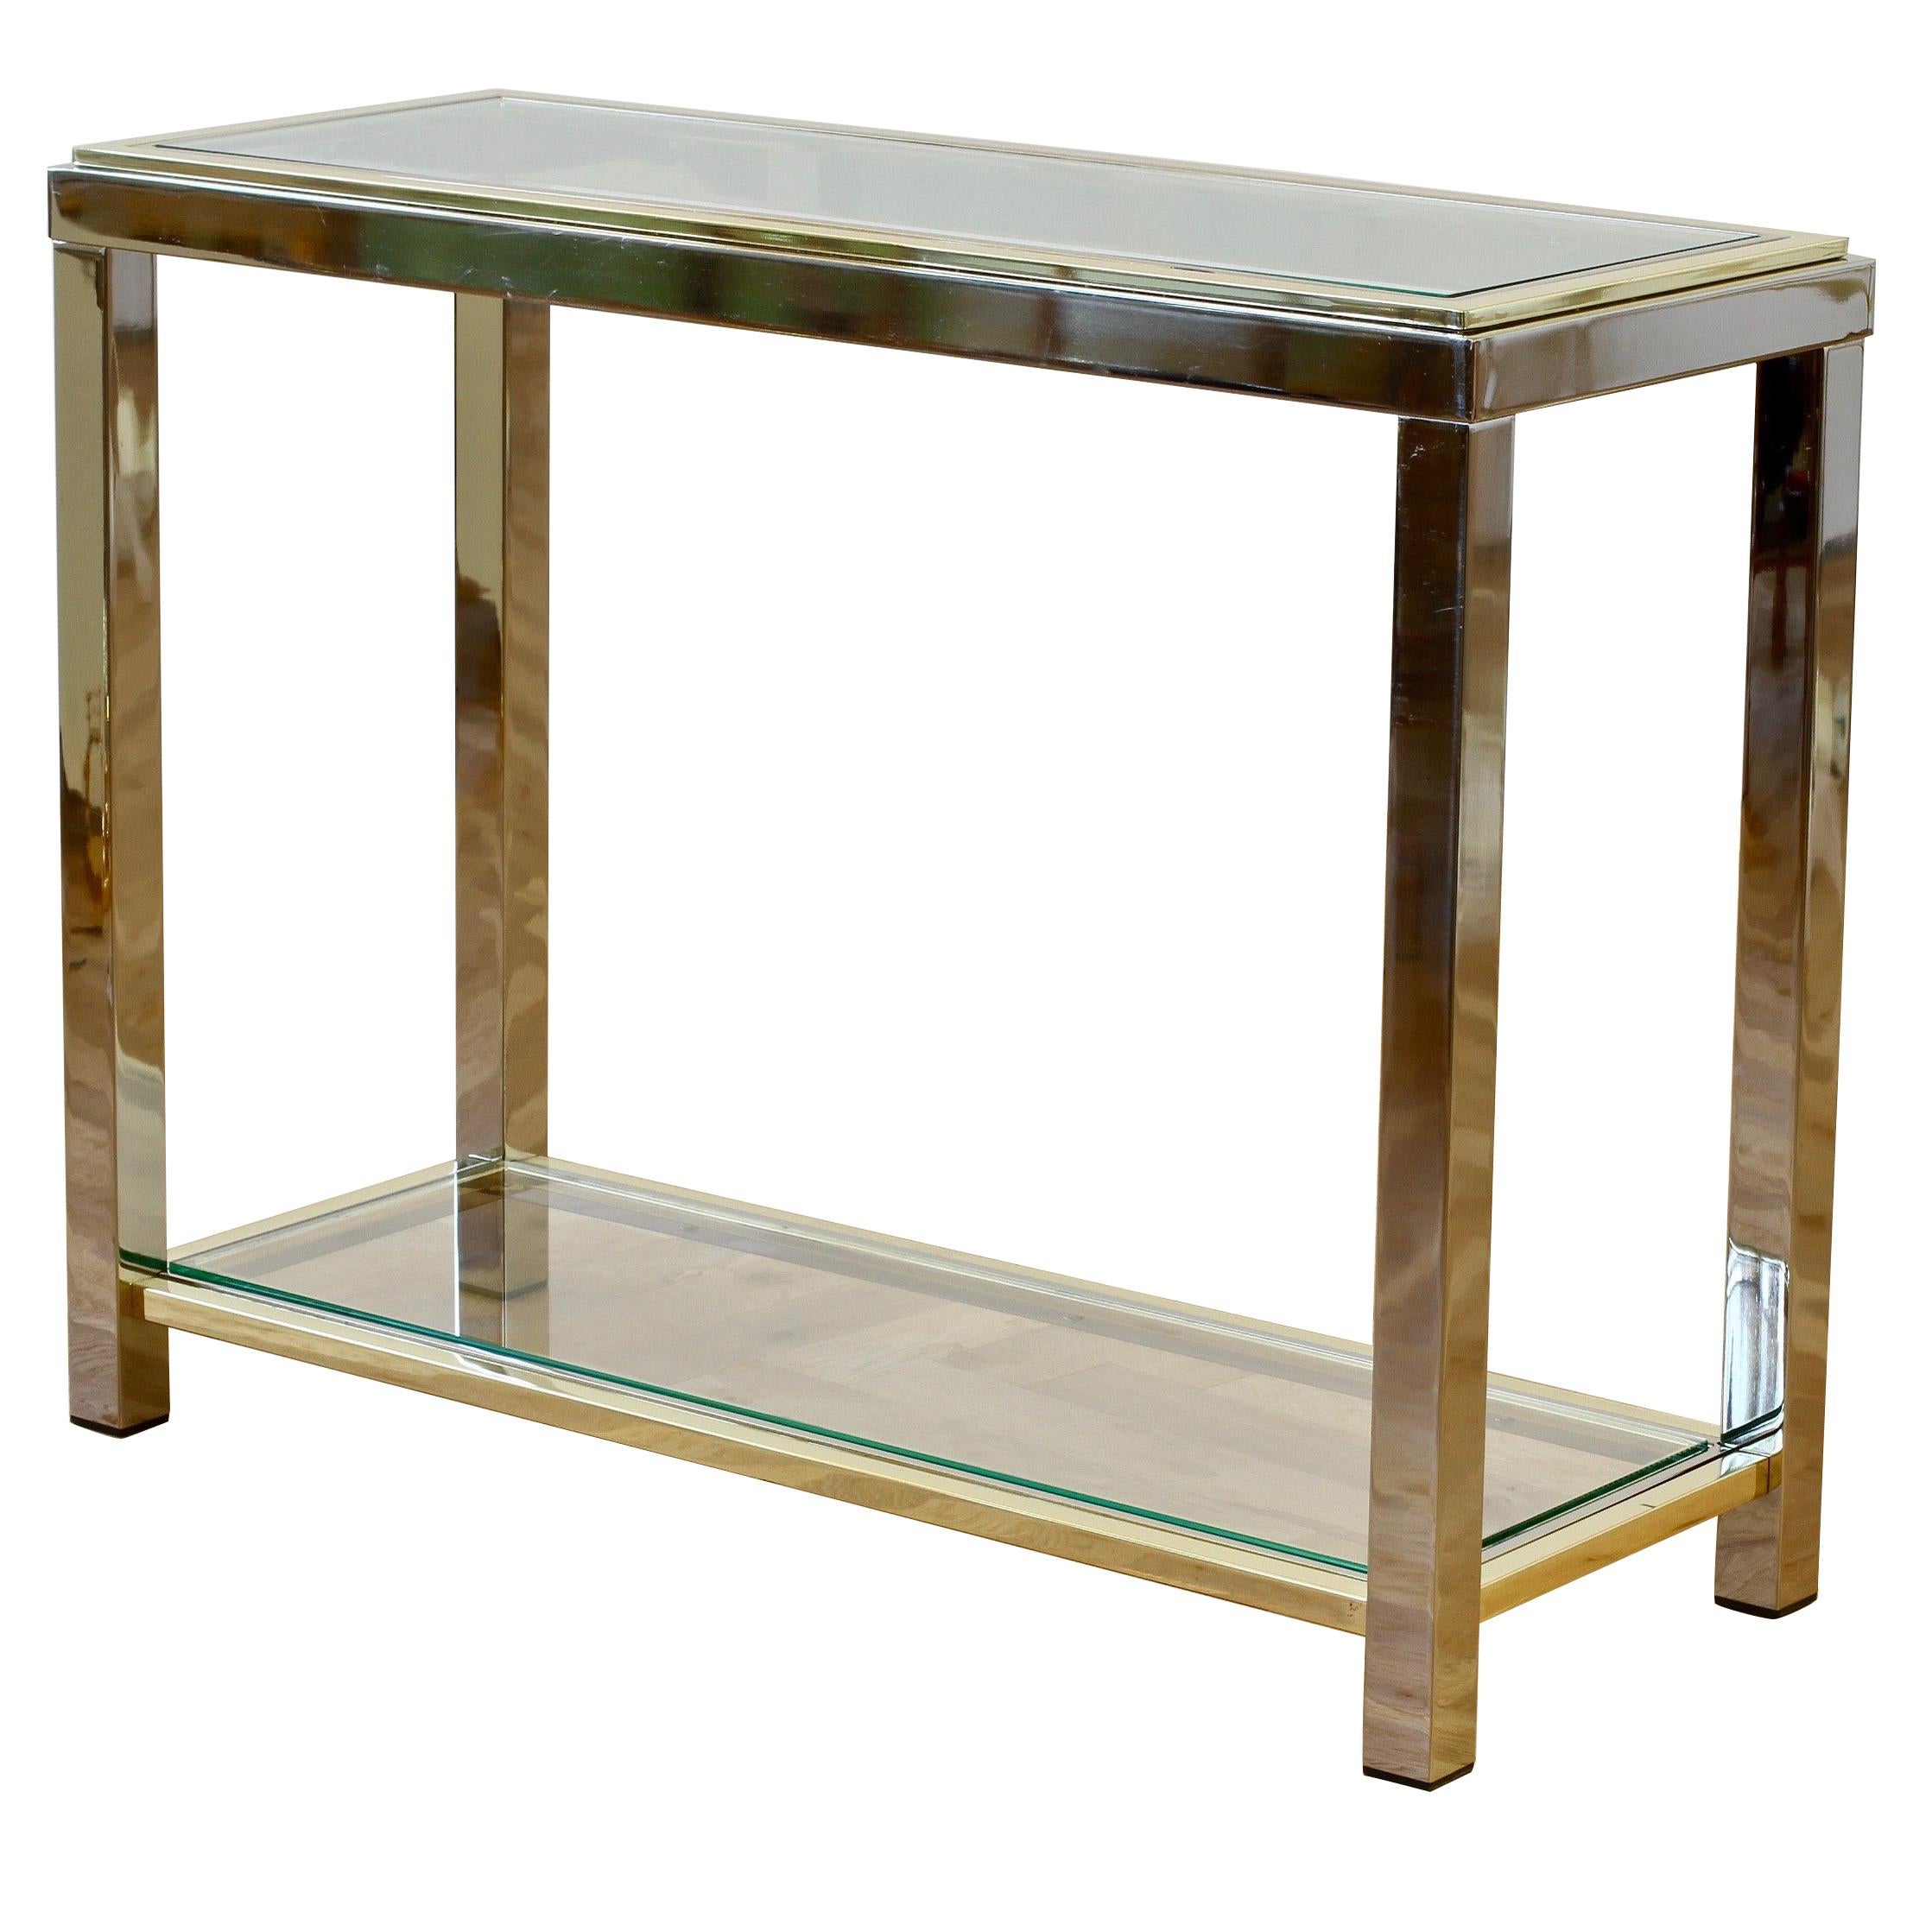 Chrome & Brass Bicolor Two-Tiered Double Shelved Console Table